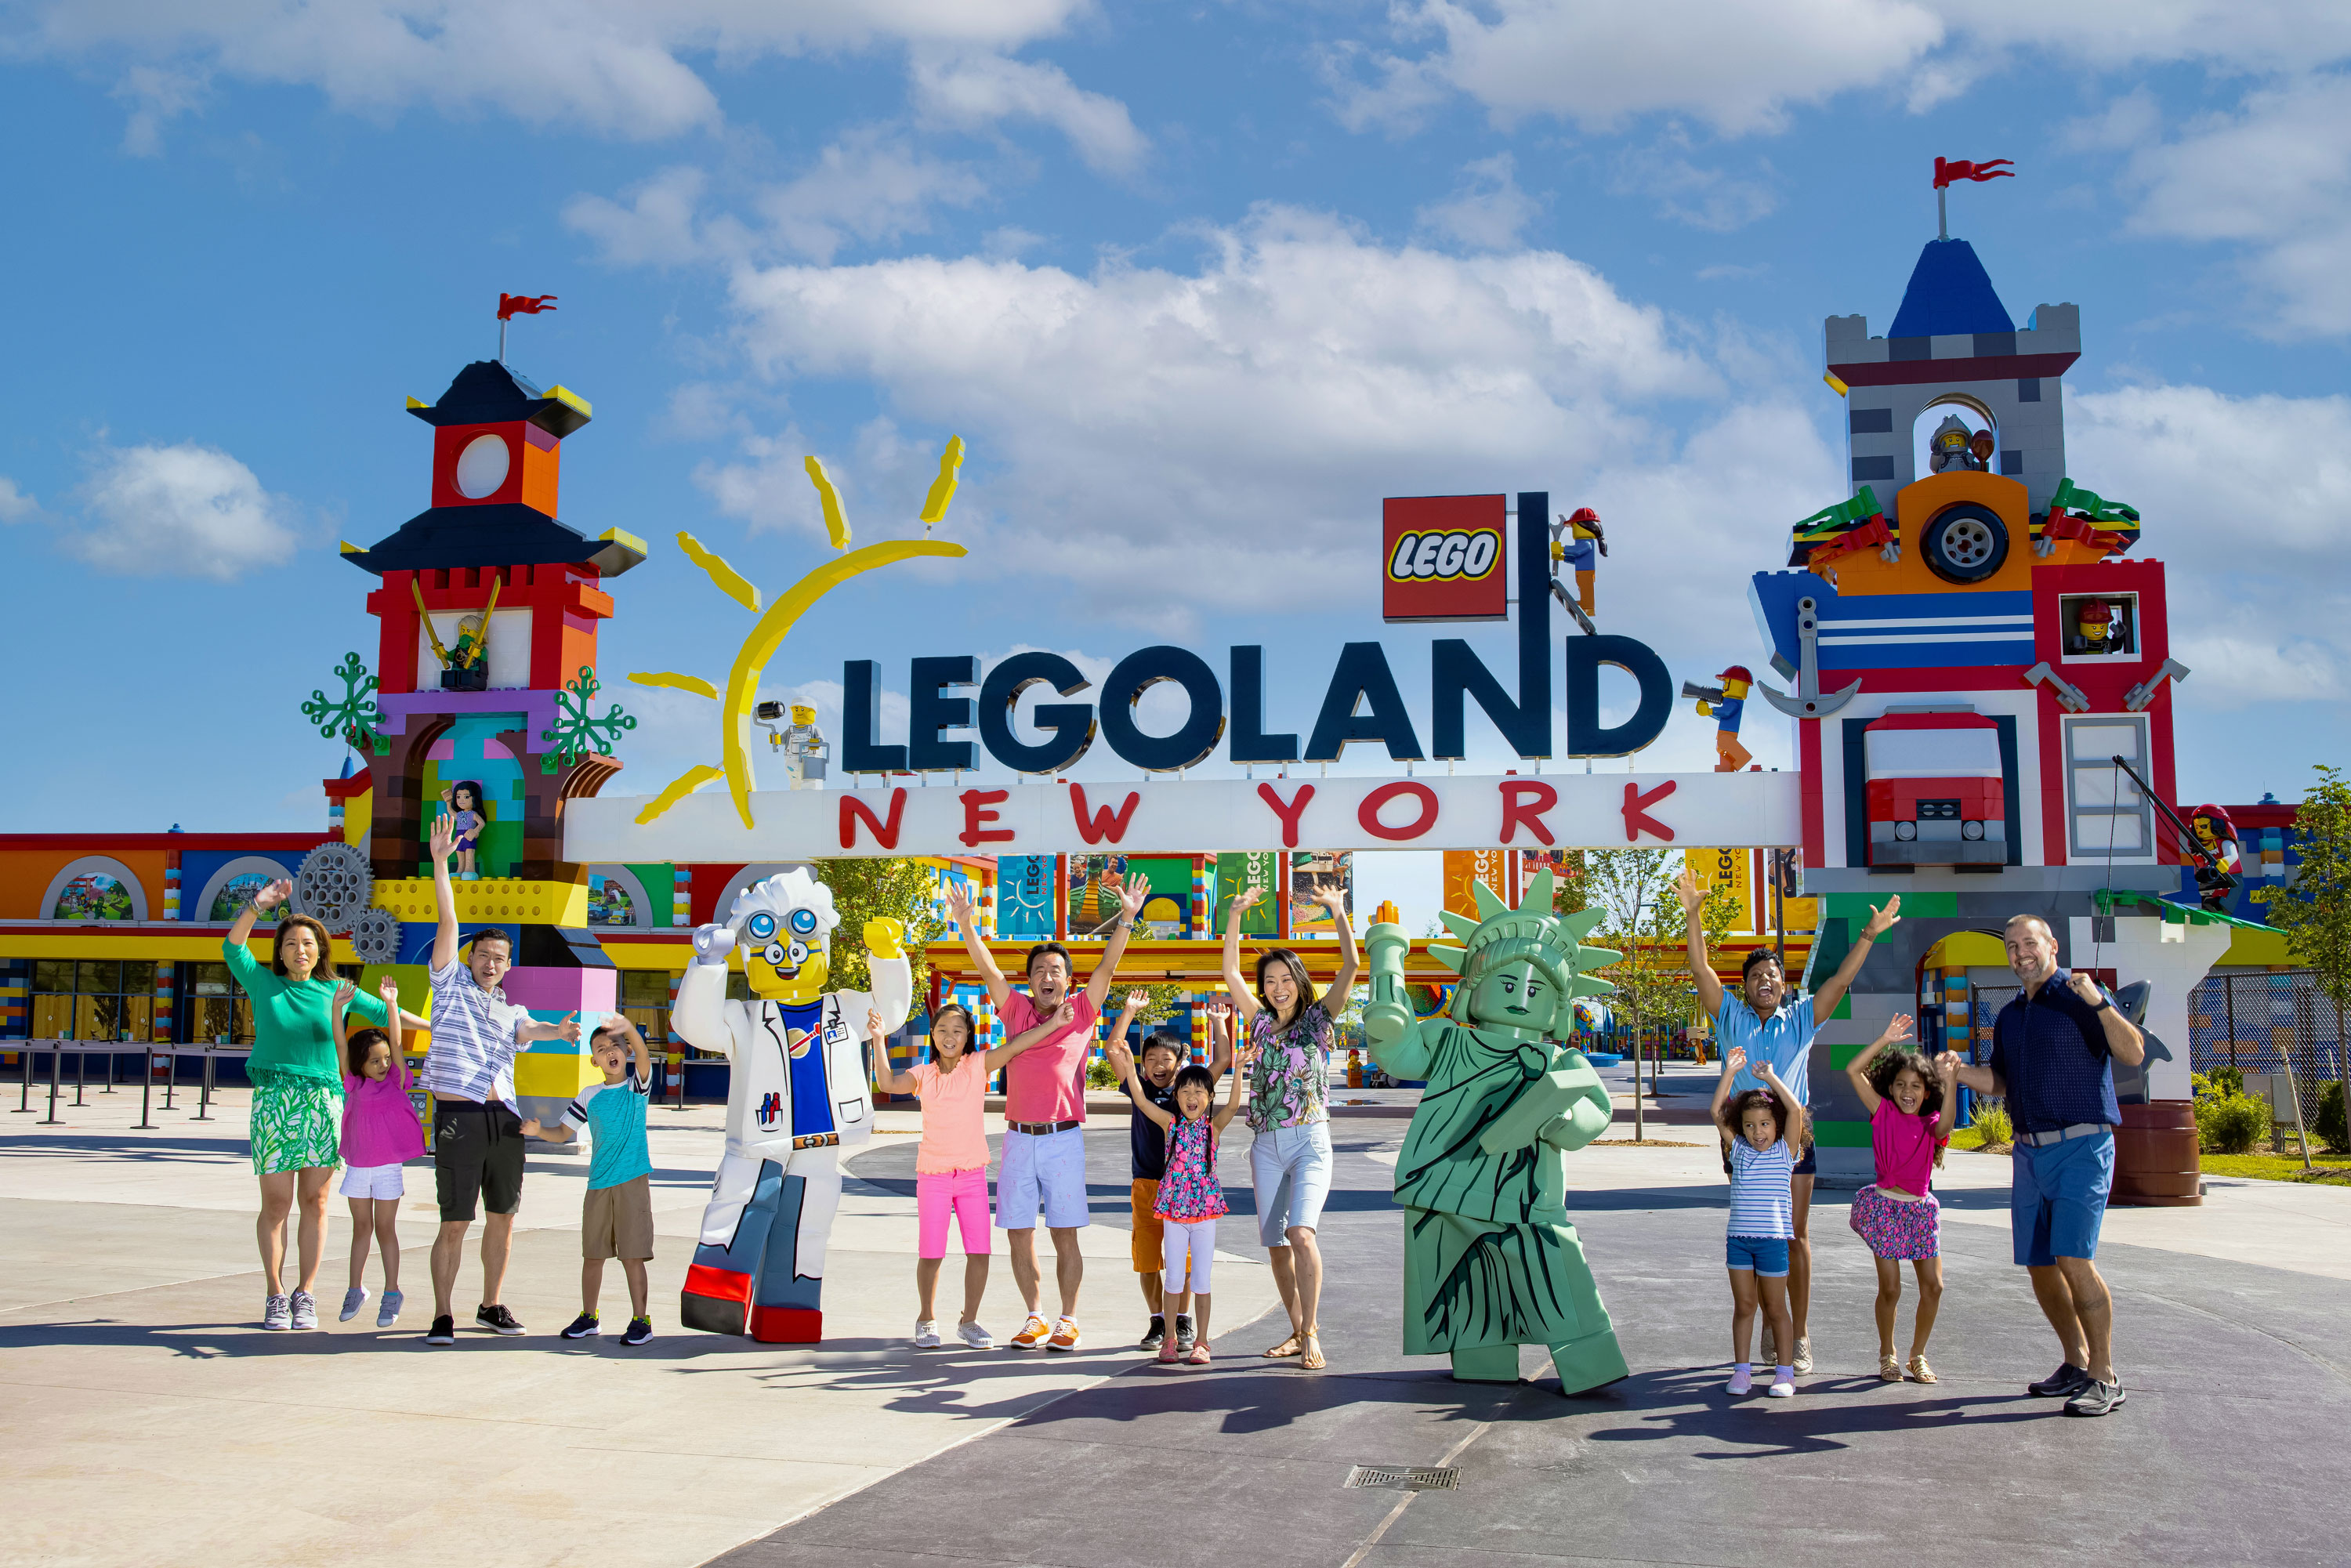 LEGOLAND New York Welcome Arch